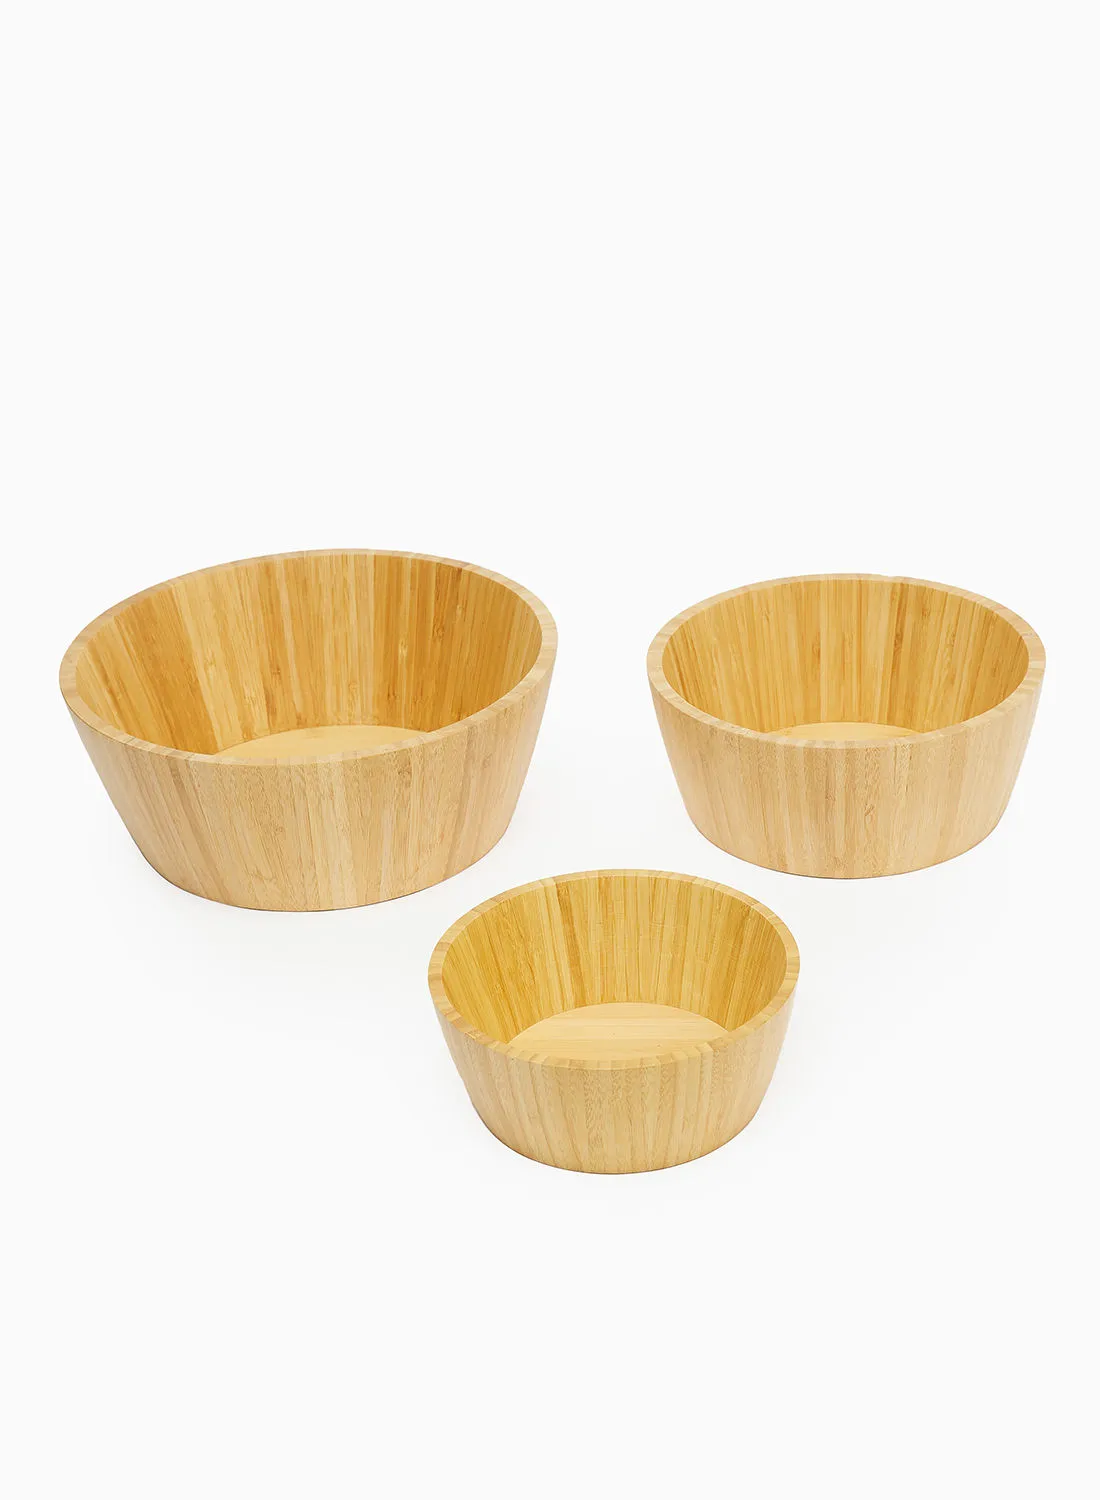 noon east 3 Piece Mixing Bowls Set - Made Of Bamboo - For Everyday Use - Light Weight - For Salad, Snacks - Mixing Bowl - Bowl Set - Salad Bowl - Bowls - Kitchen Accessories - Brown